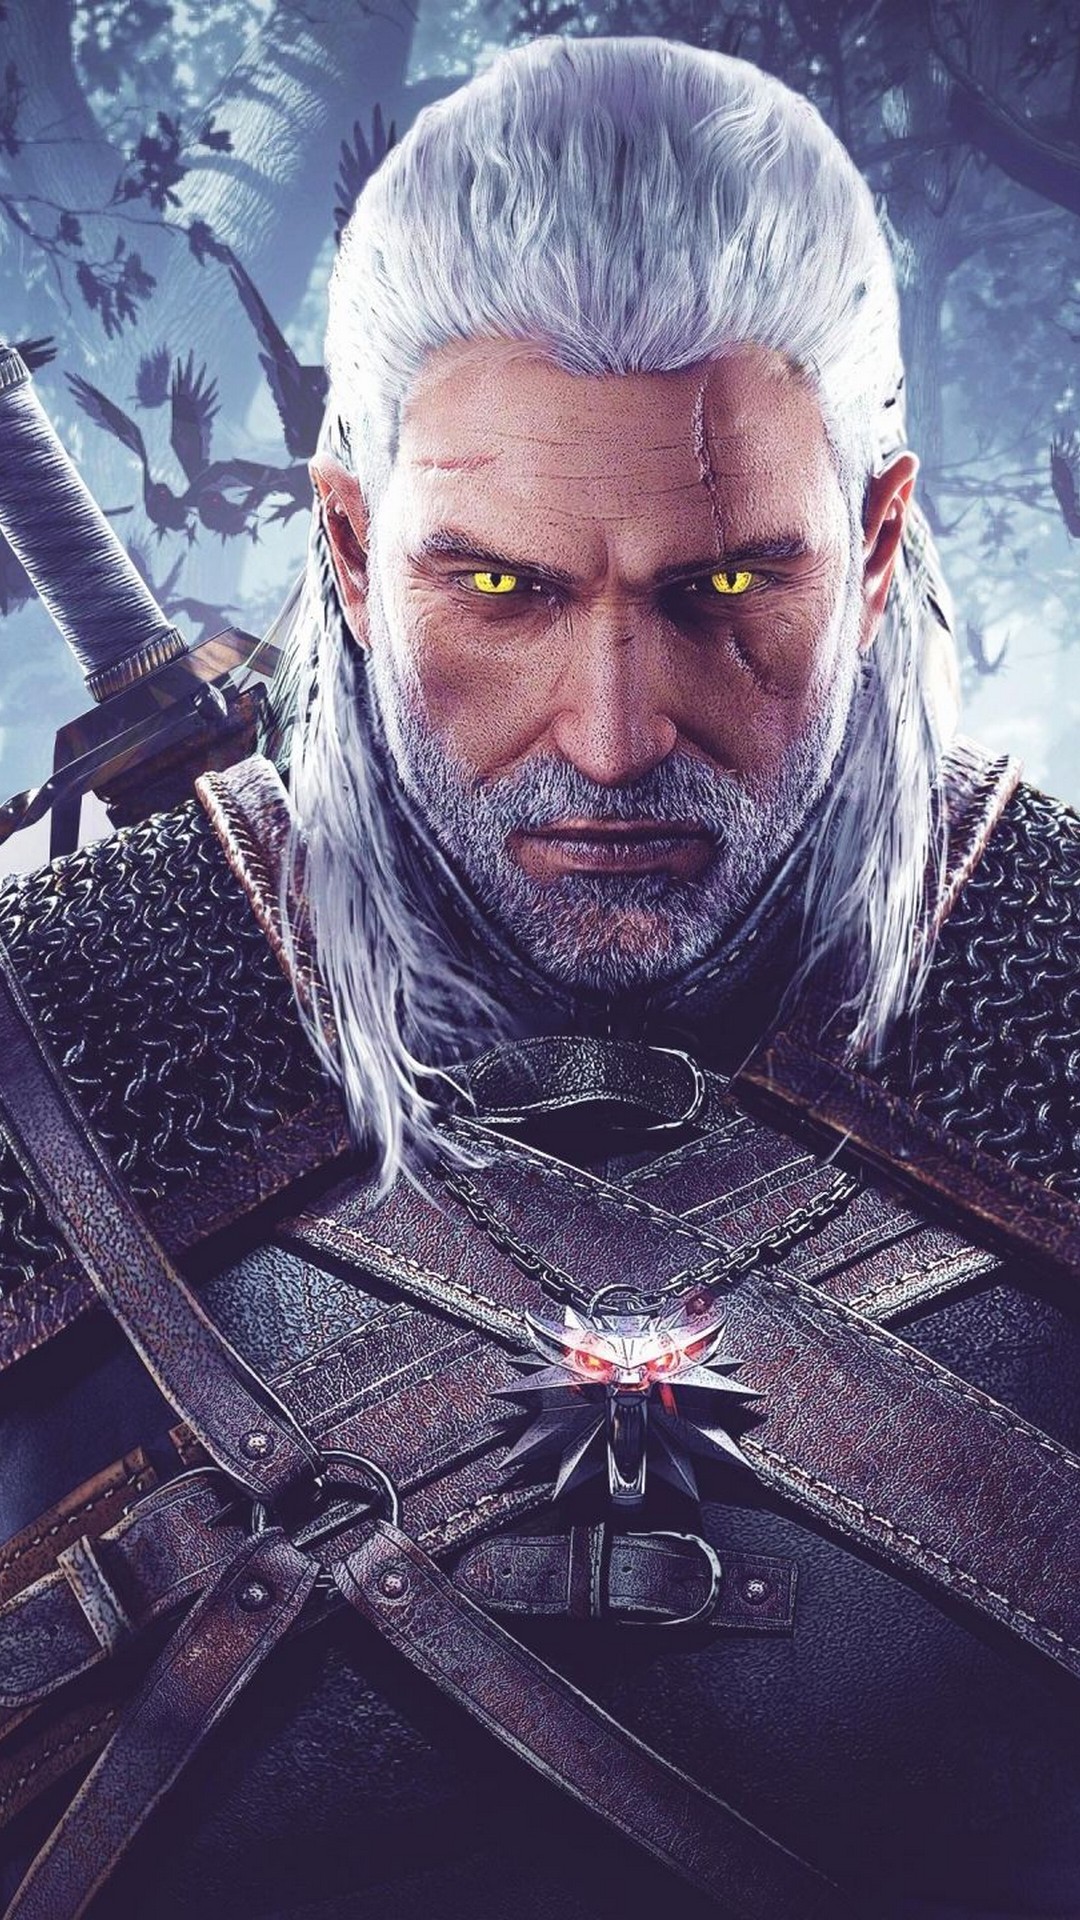 The Witcher Phone 8 Wallpaper with high-resolution 1080x1920 pixel. Download all Mobile Wallpapers and Use them as wallpapers for your iPhone, Tablet, iPad, Android and other mobile devices